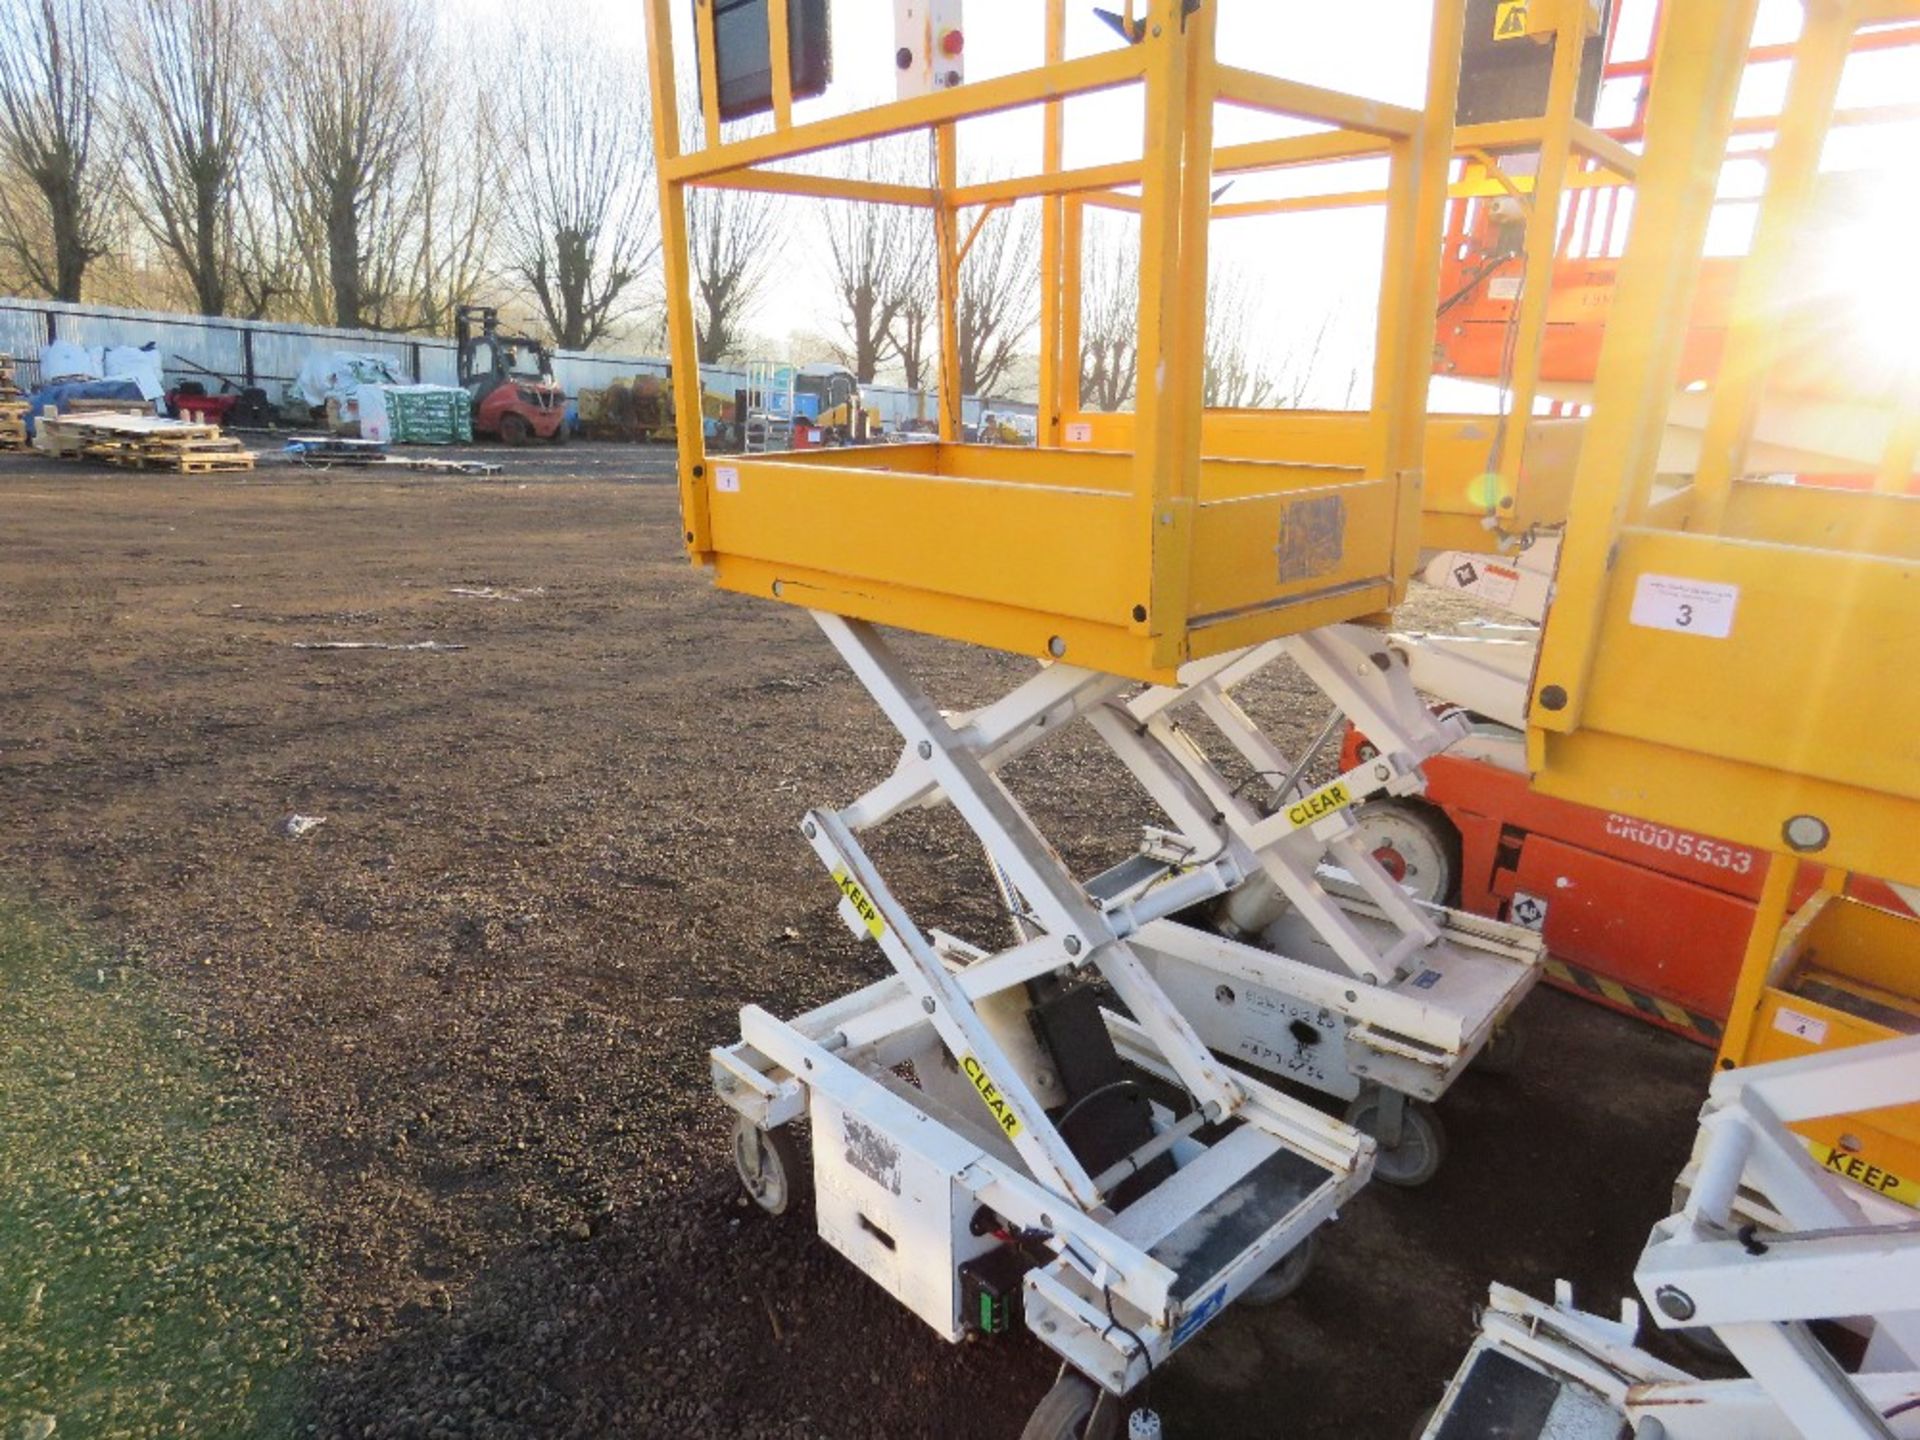 HYBRID HBP3.6 YELLOW BATTERY POWERED ACCESS PLATFORM, 3.6M MAX WORKING HEIGHT. PN:E04/10220. WHEN TE - Image 4 of 7